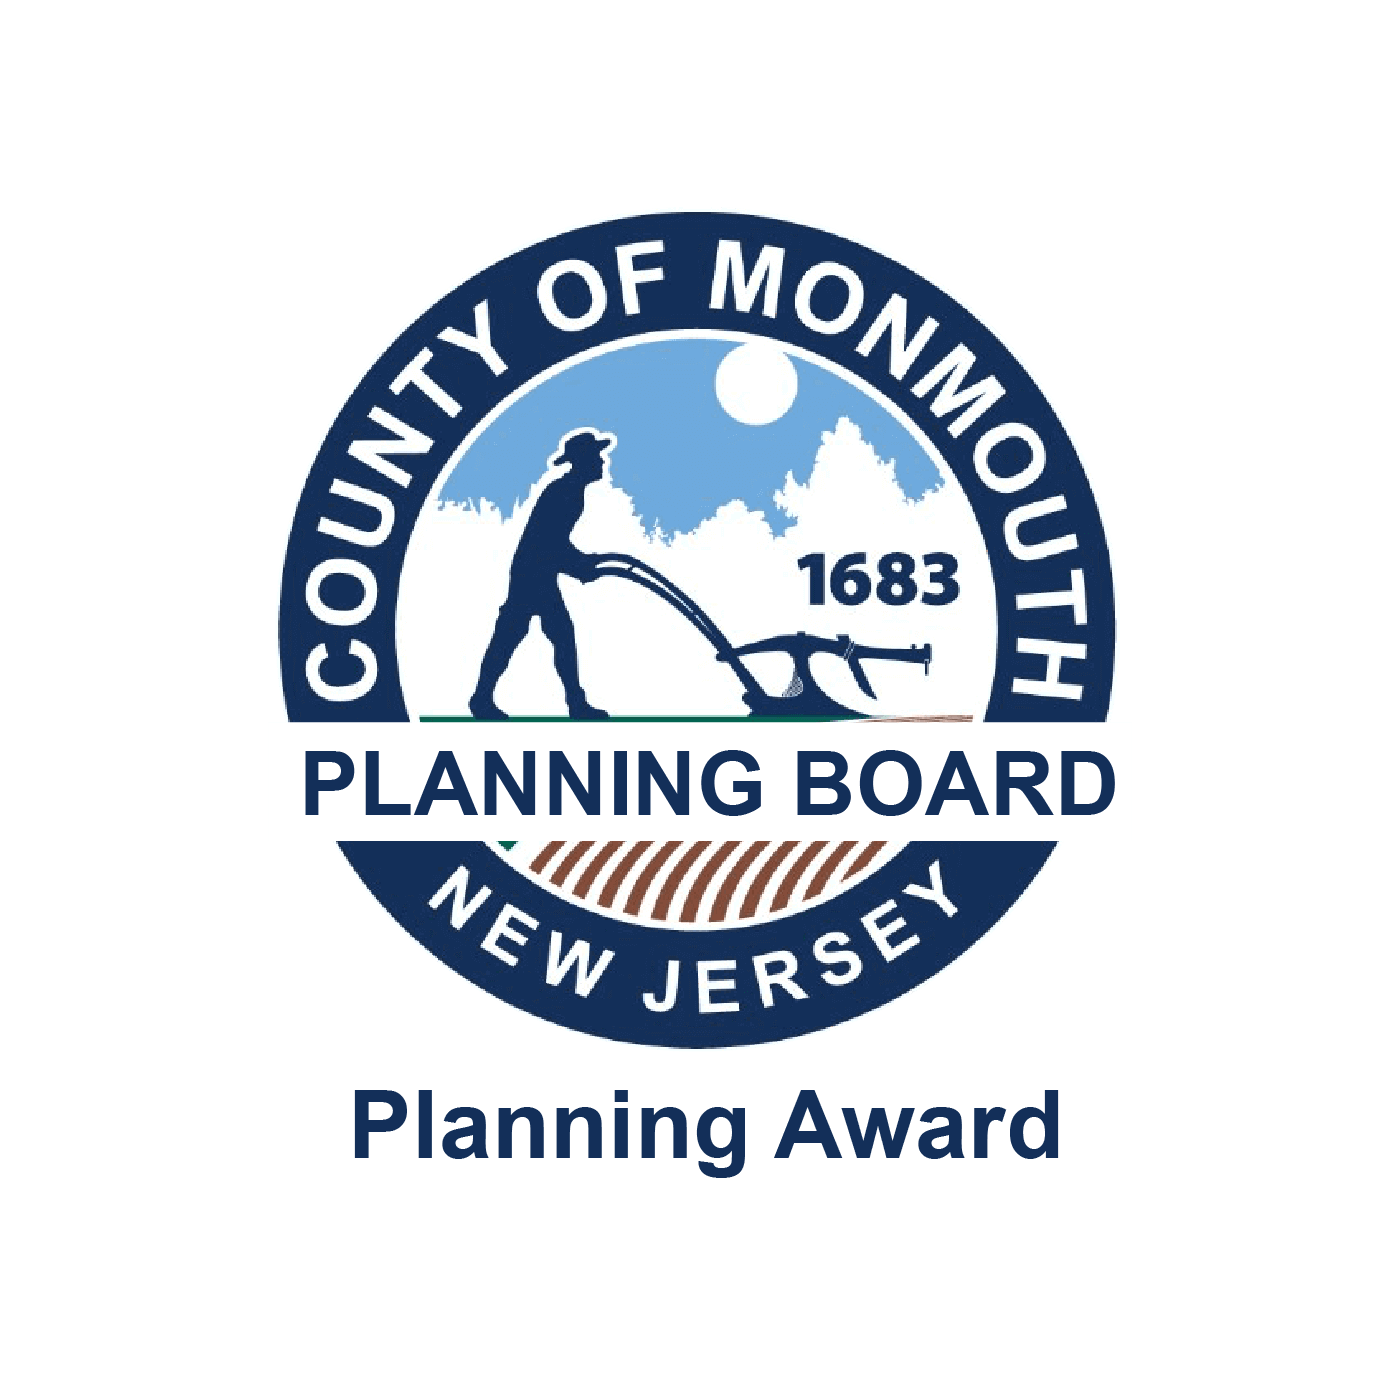 City of Monmouth Planning Award